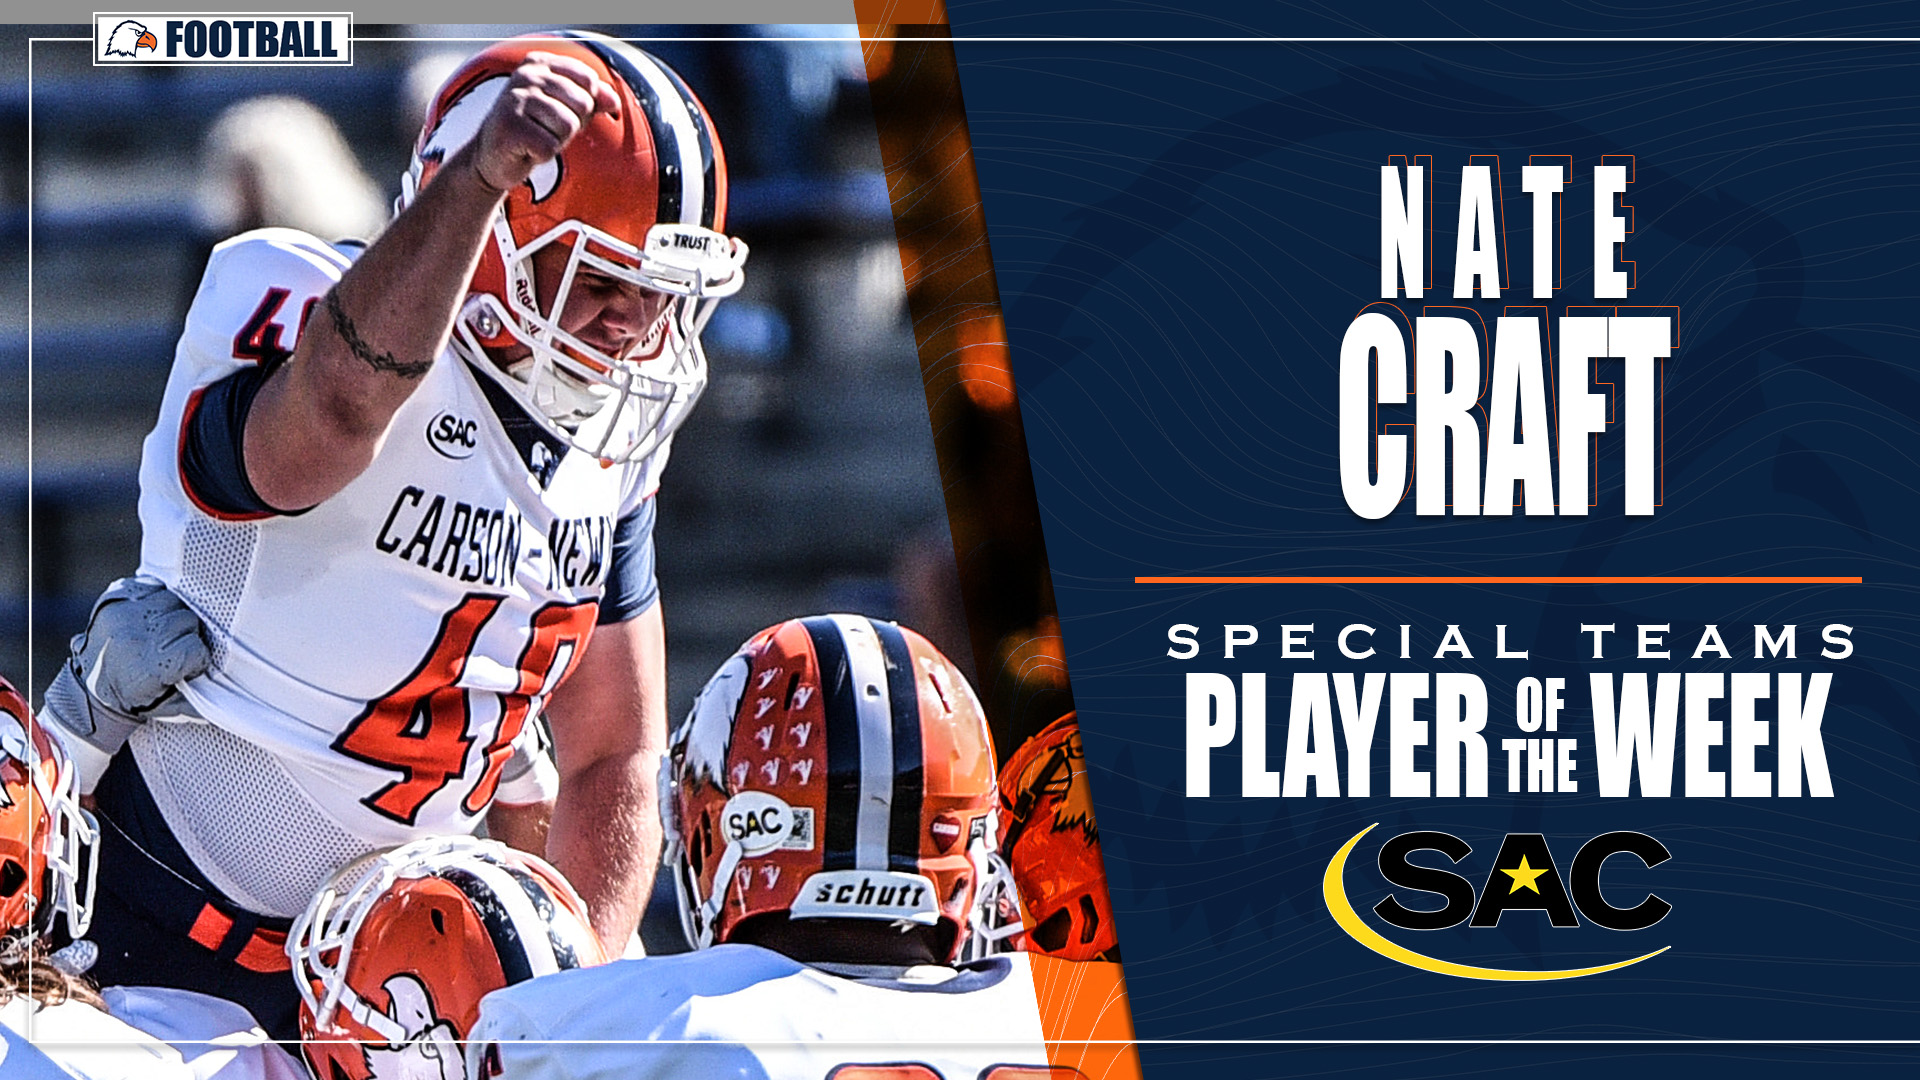 Craft takes home second SAC AstroTurf Special Teams Player of the Week award